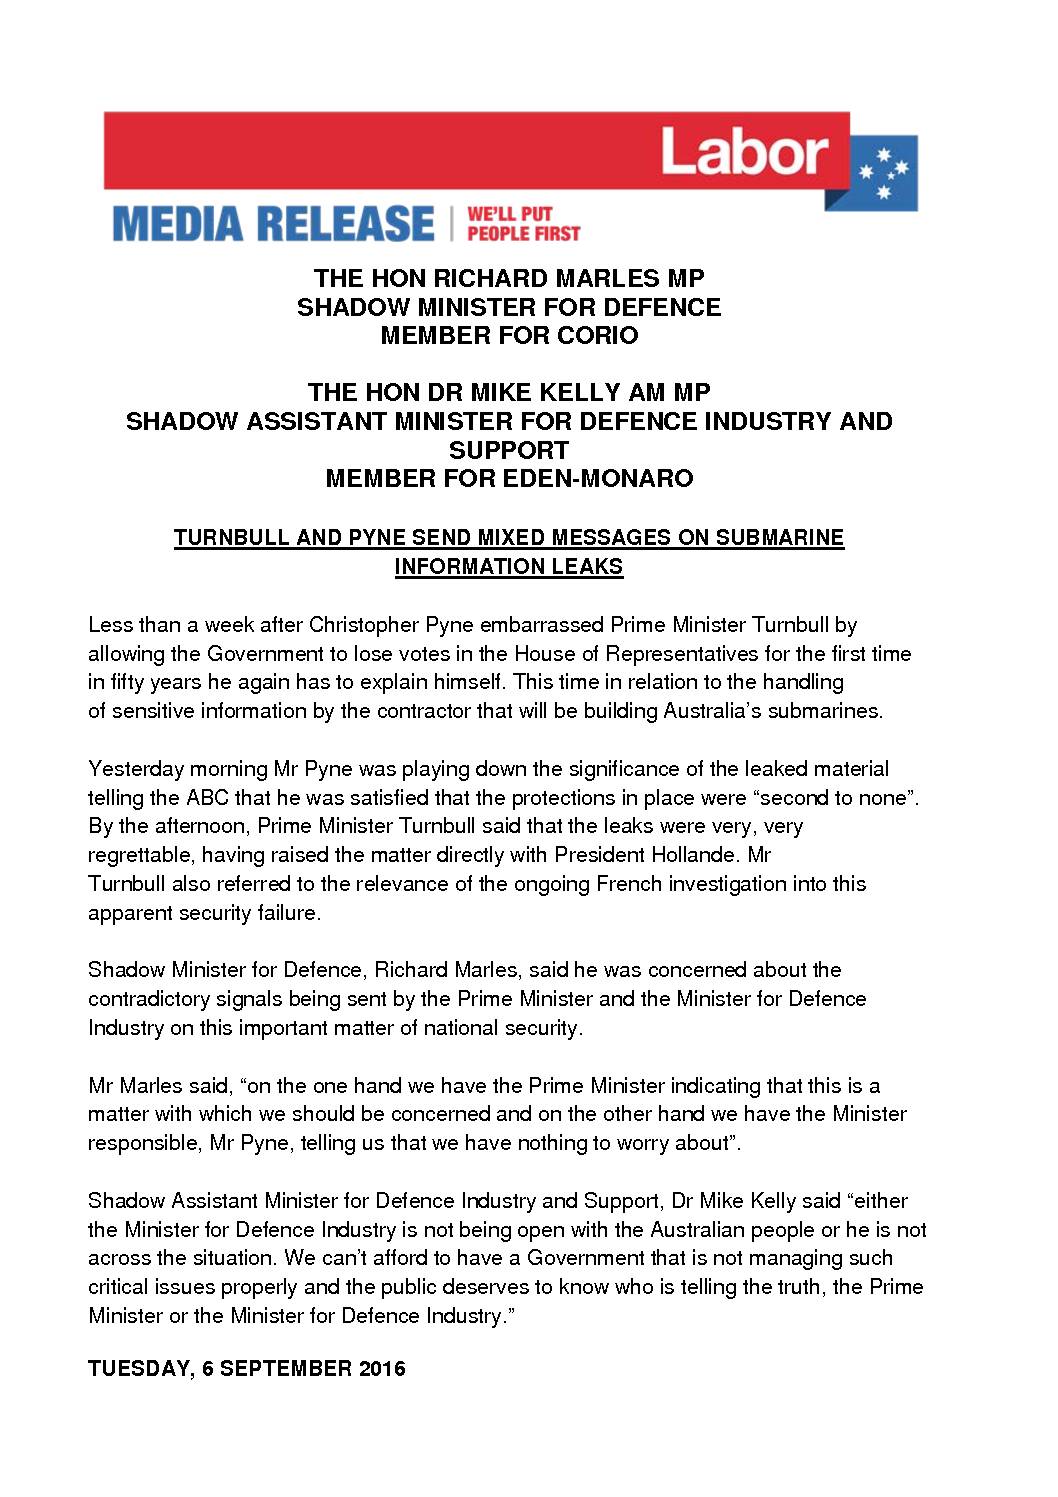 16.09.06 TURNBULL AND PYNE SEND MIXED MESSAGES ON SUBMARINE INFORMATION LEAKS